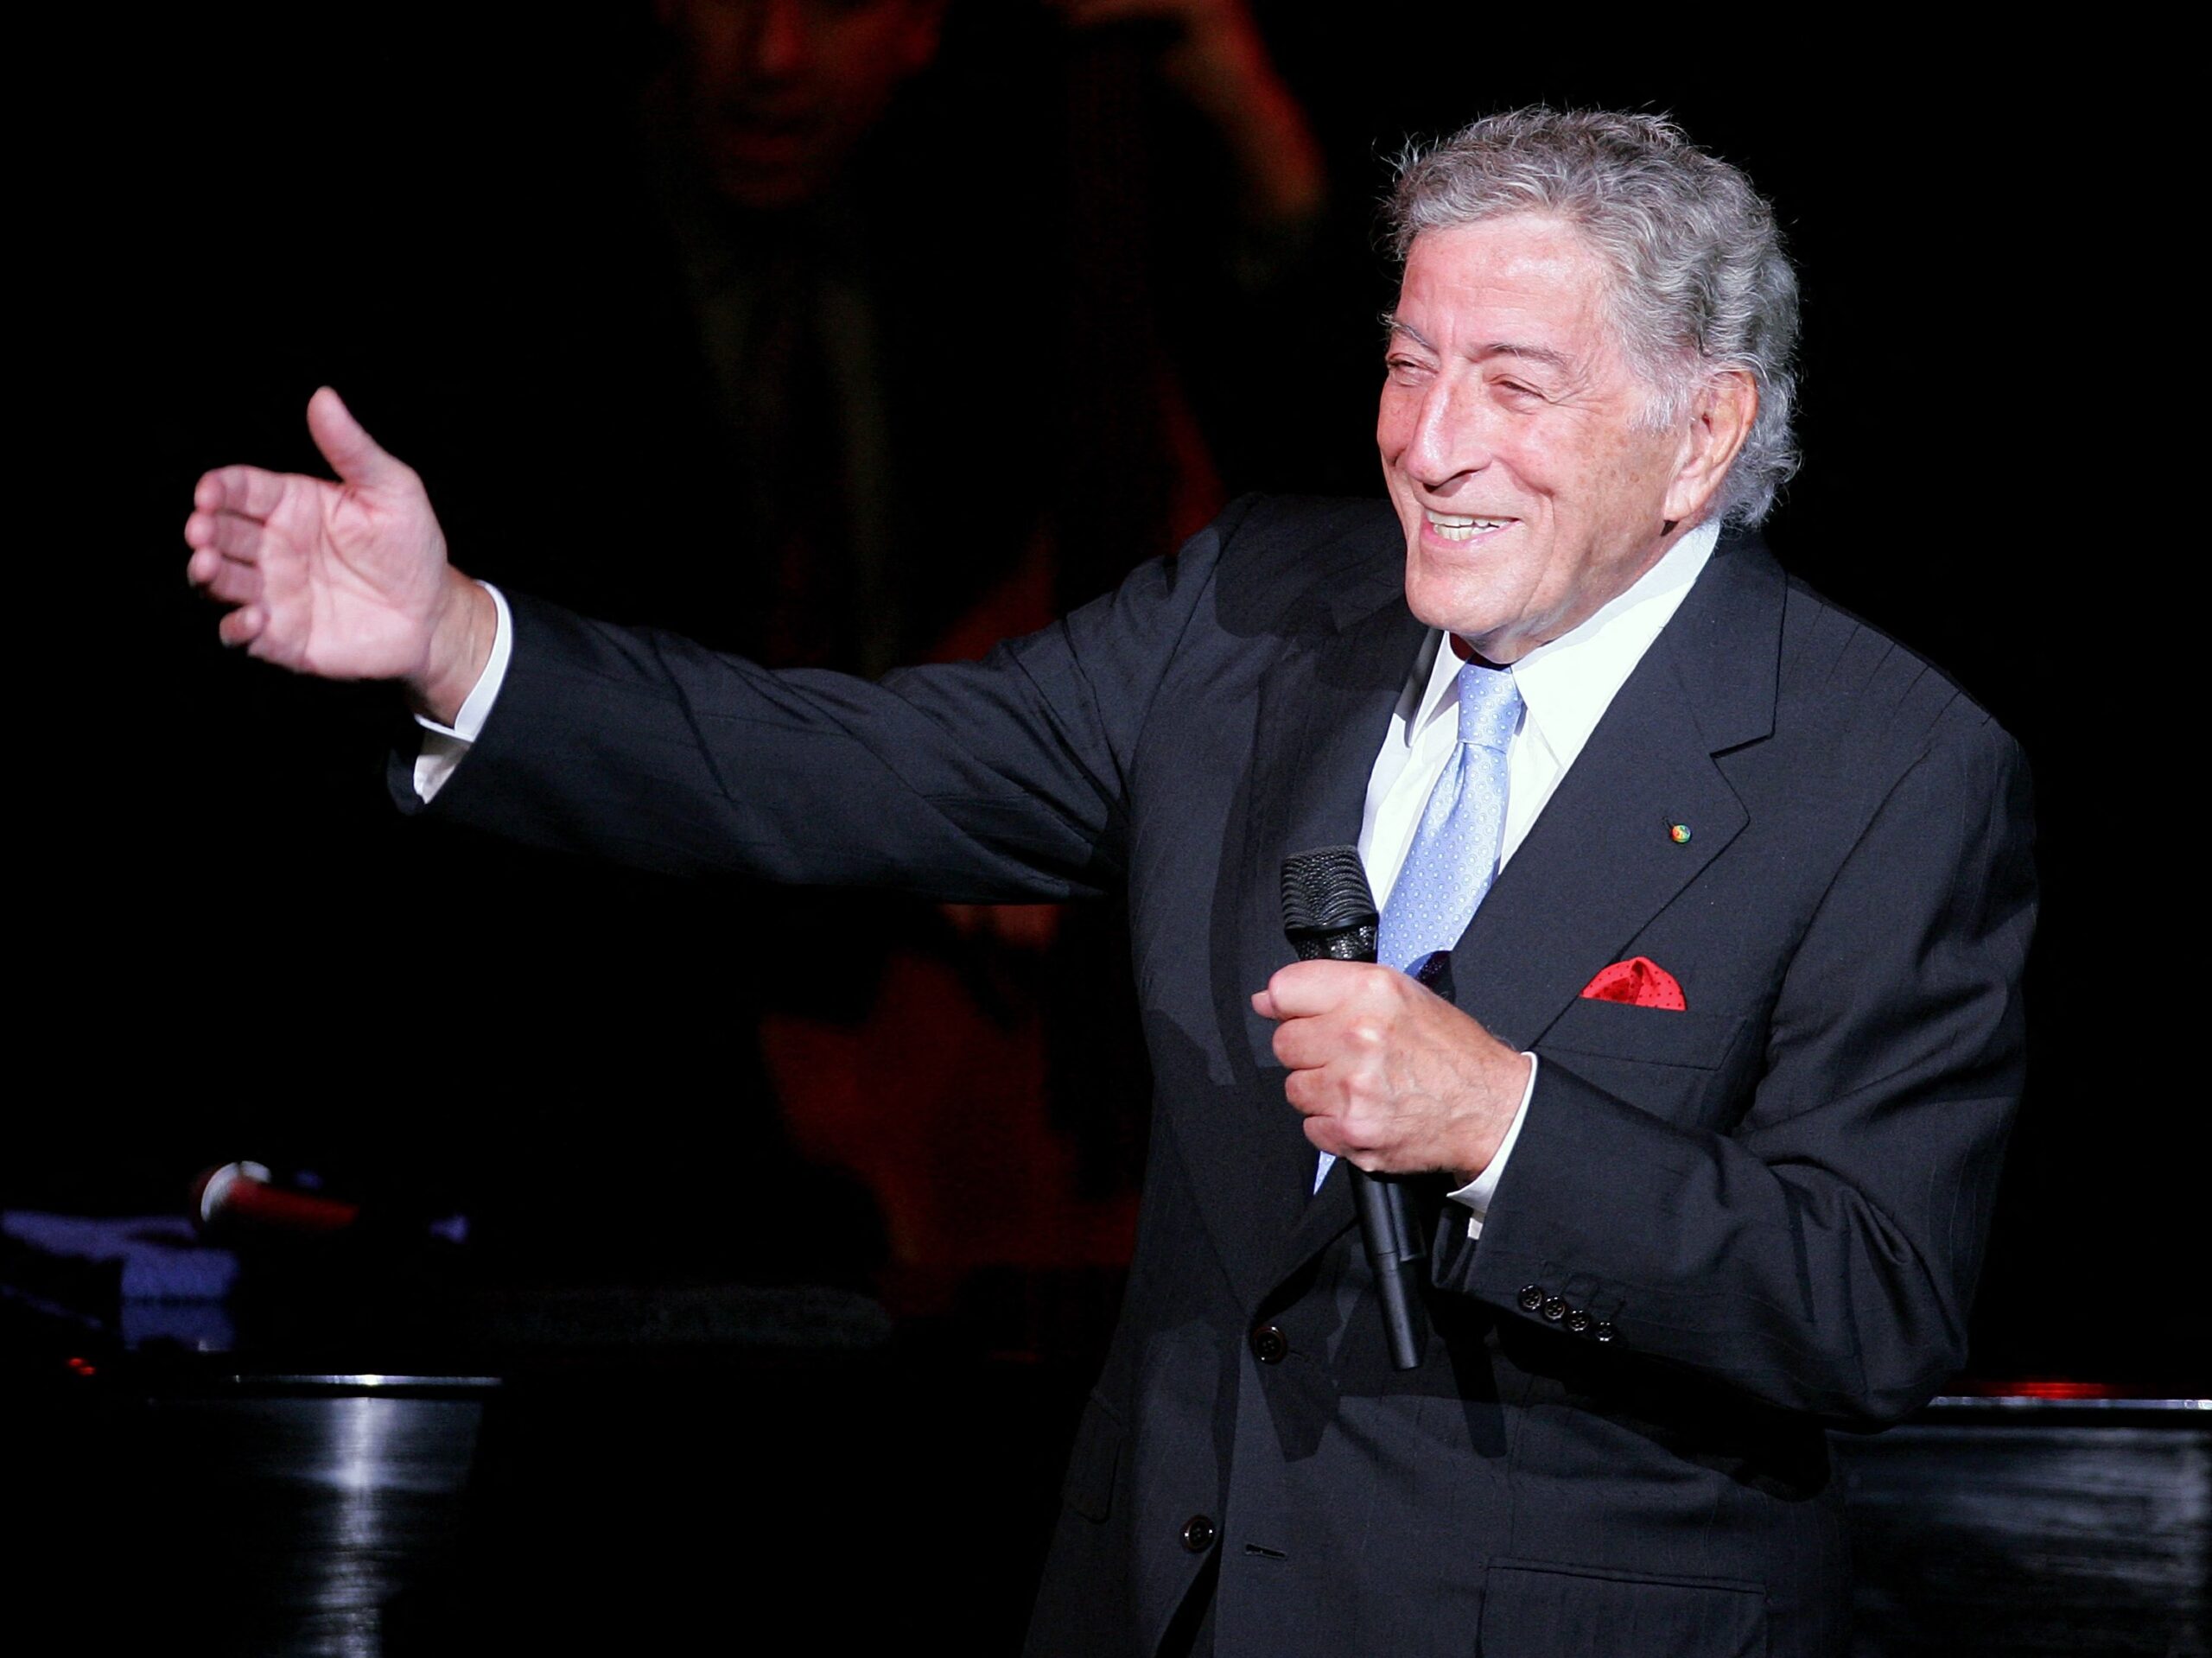 Tony Bennett, Last of Classic American Crooners, Dead at 96 | Lifestyle.INQ